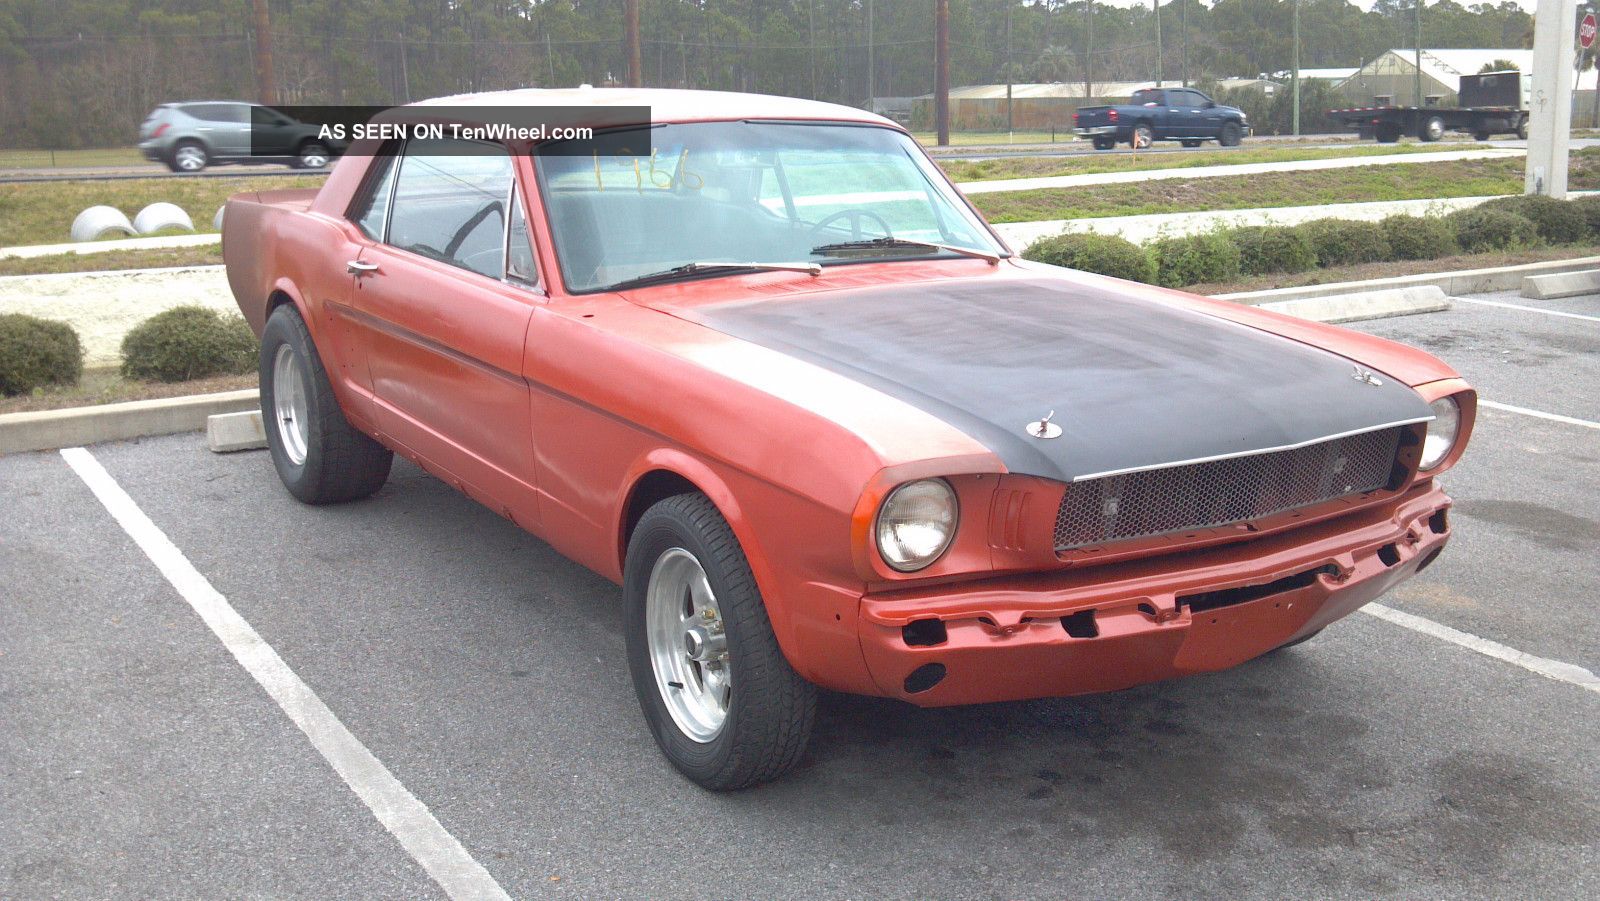 1966 Ford mustang convertible project car #1